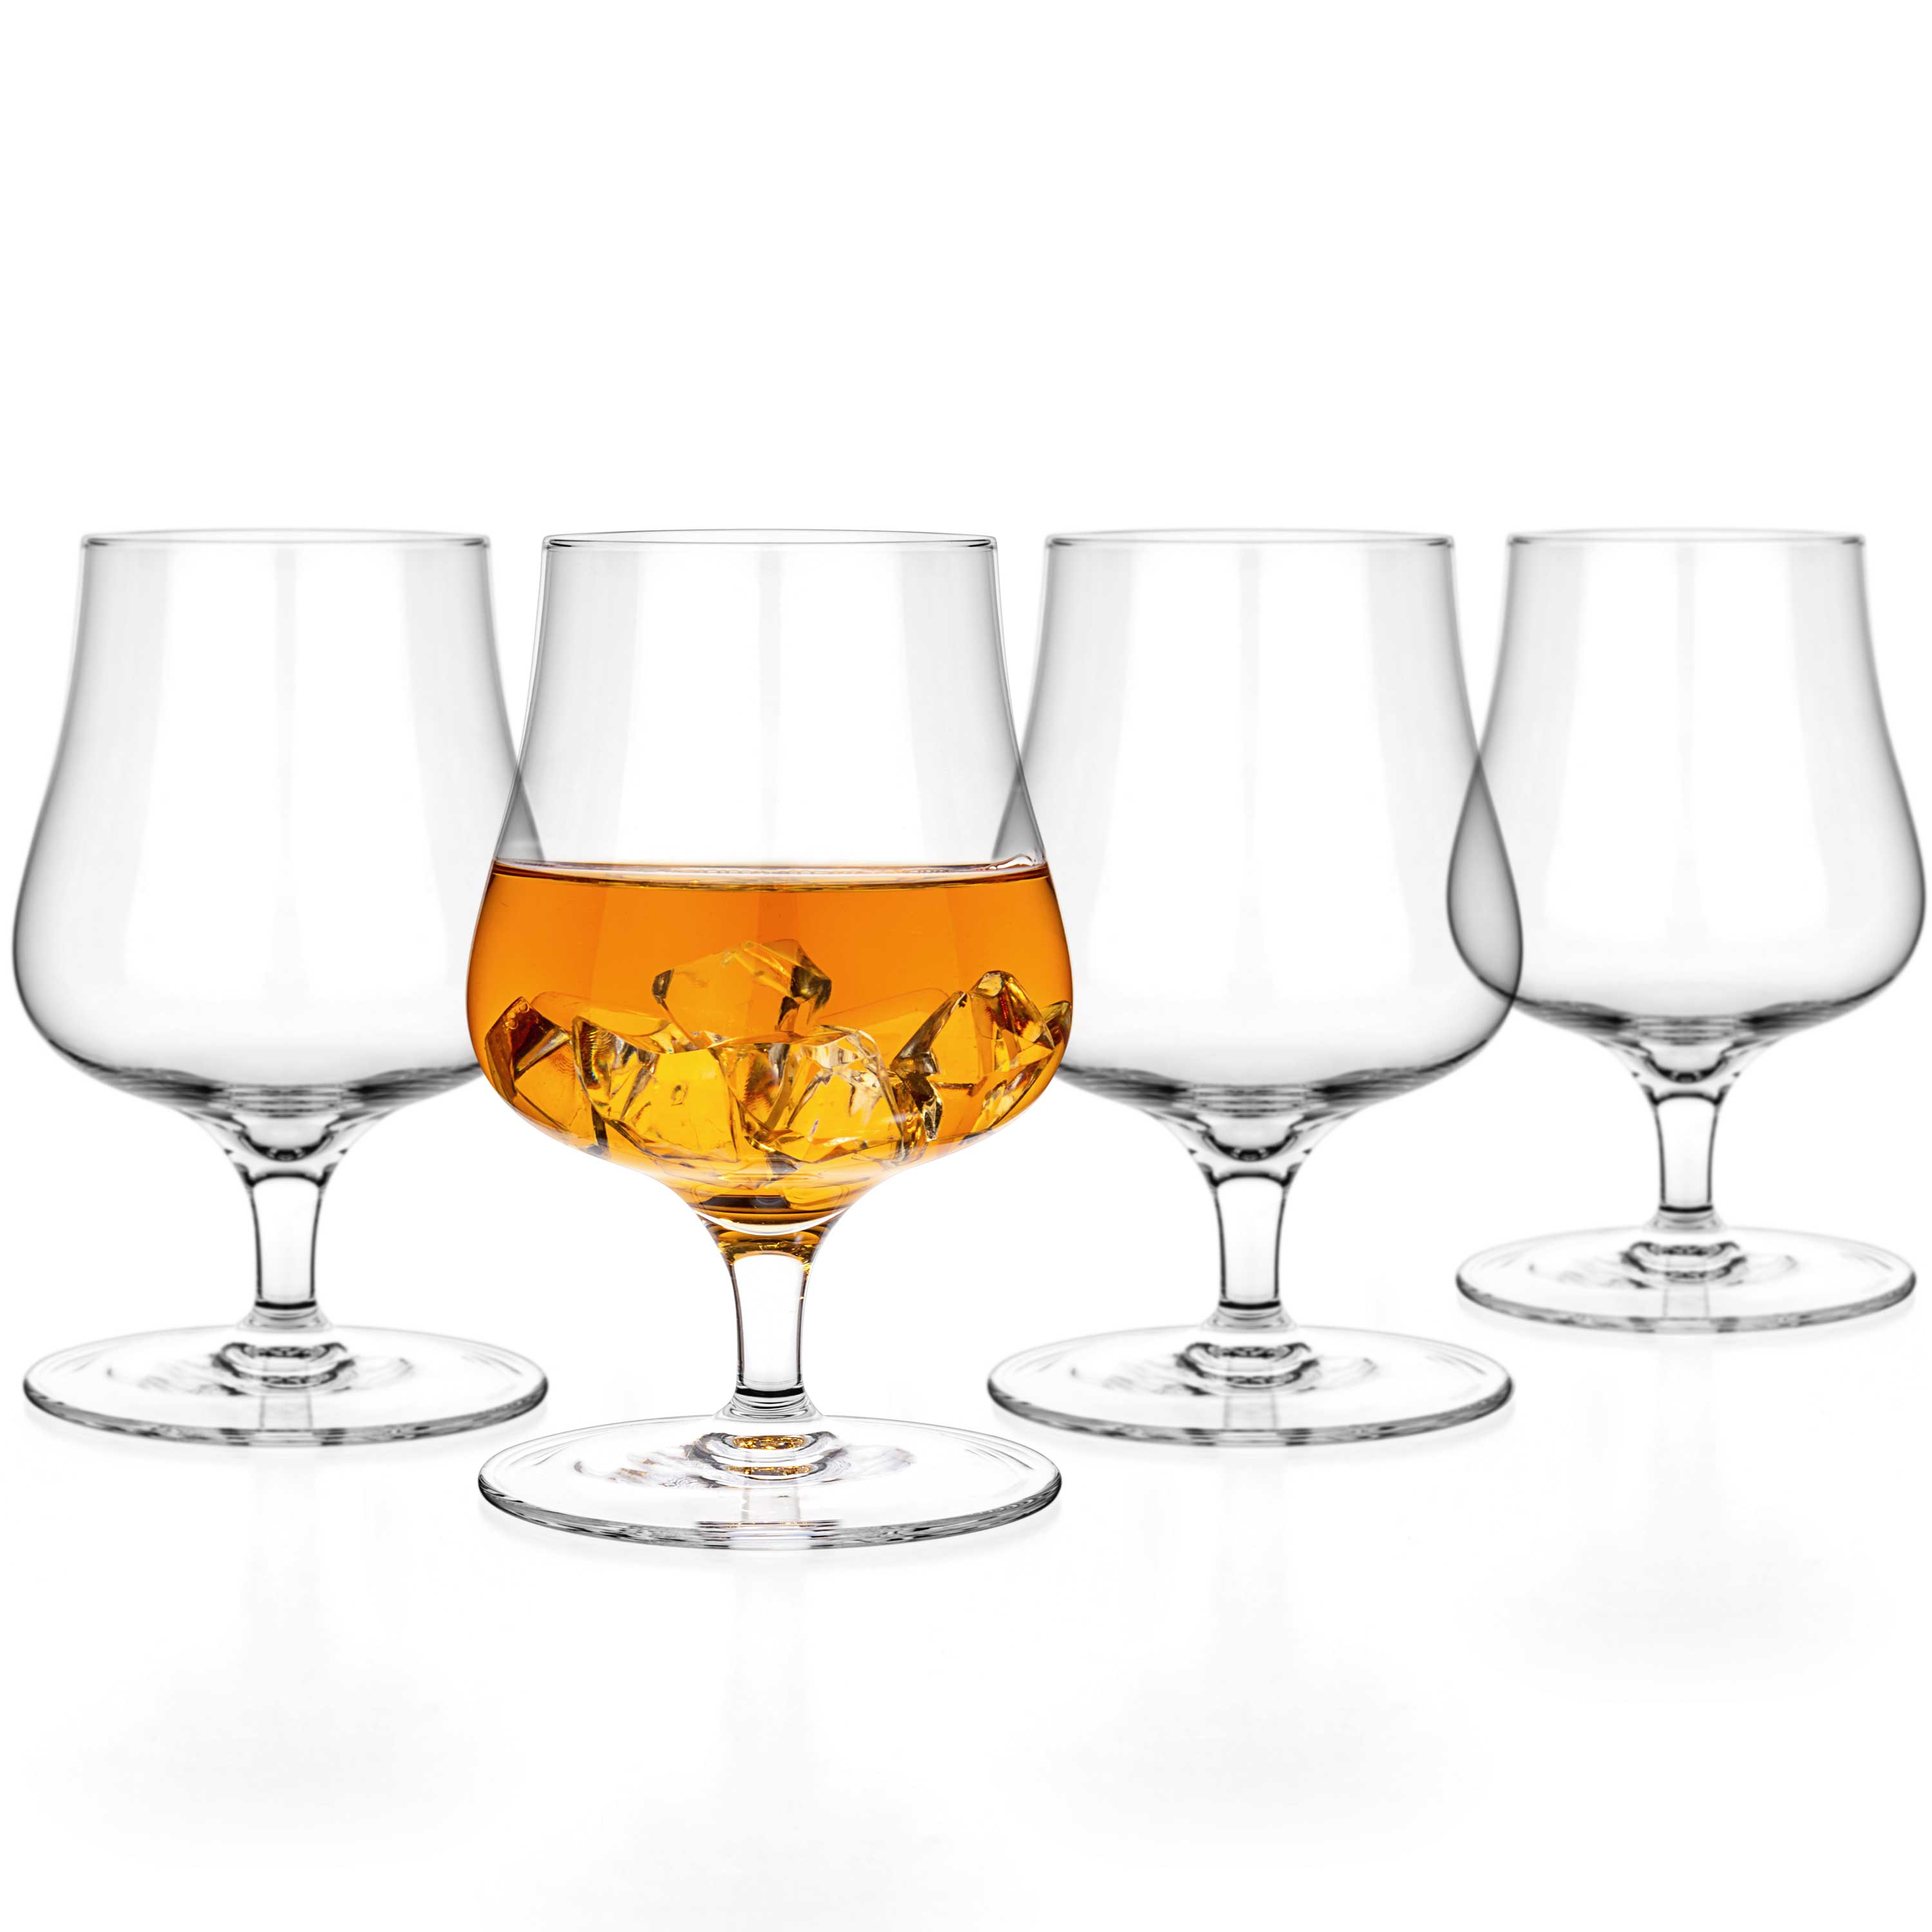 https://www.luxbe.com/images/detailed/4/brandy-and-cognac-glasses-snifters.jpg